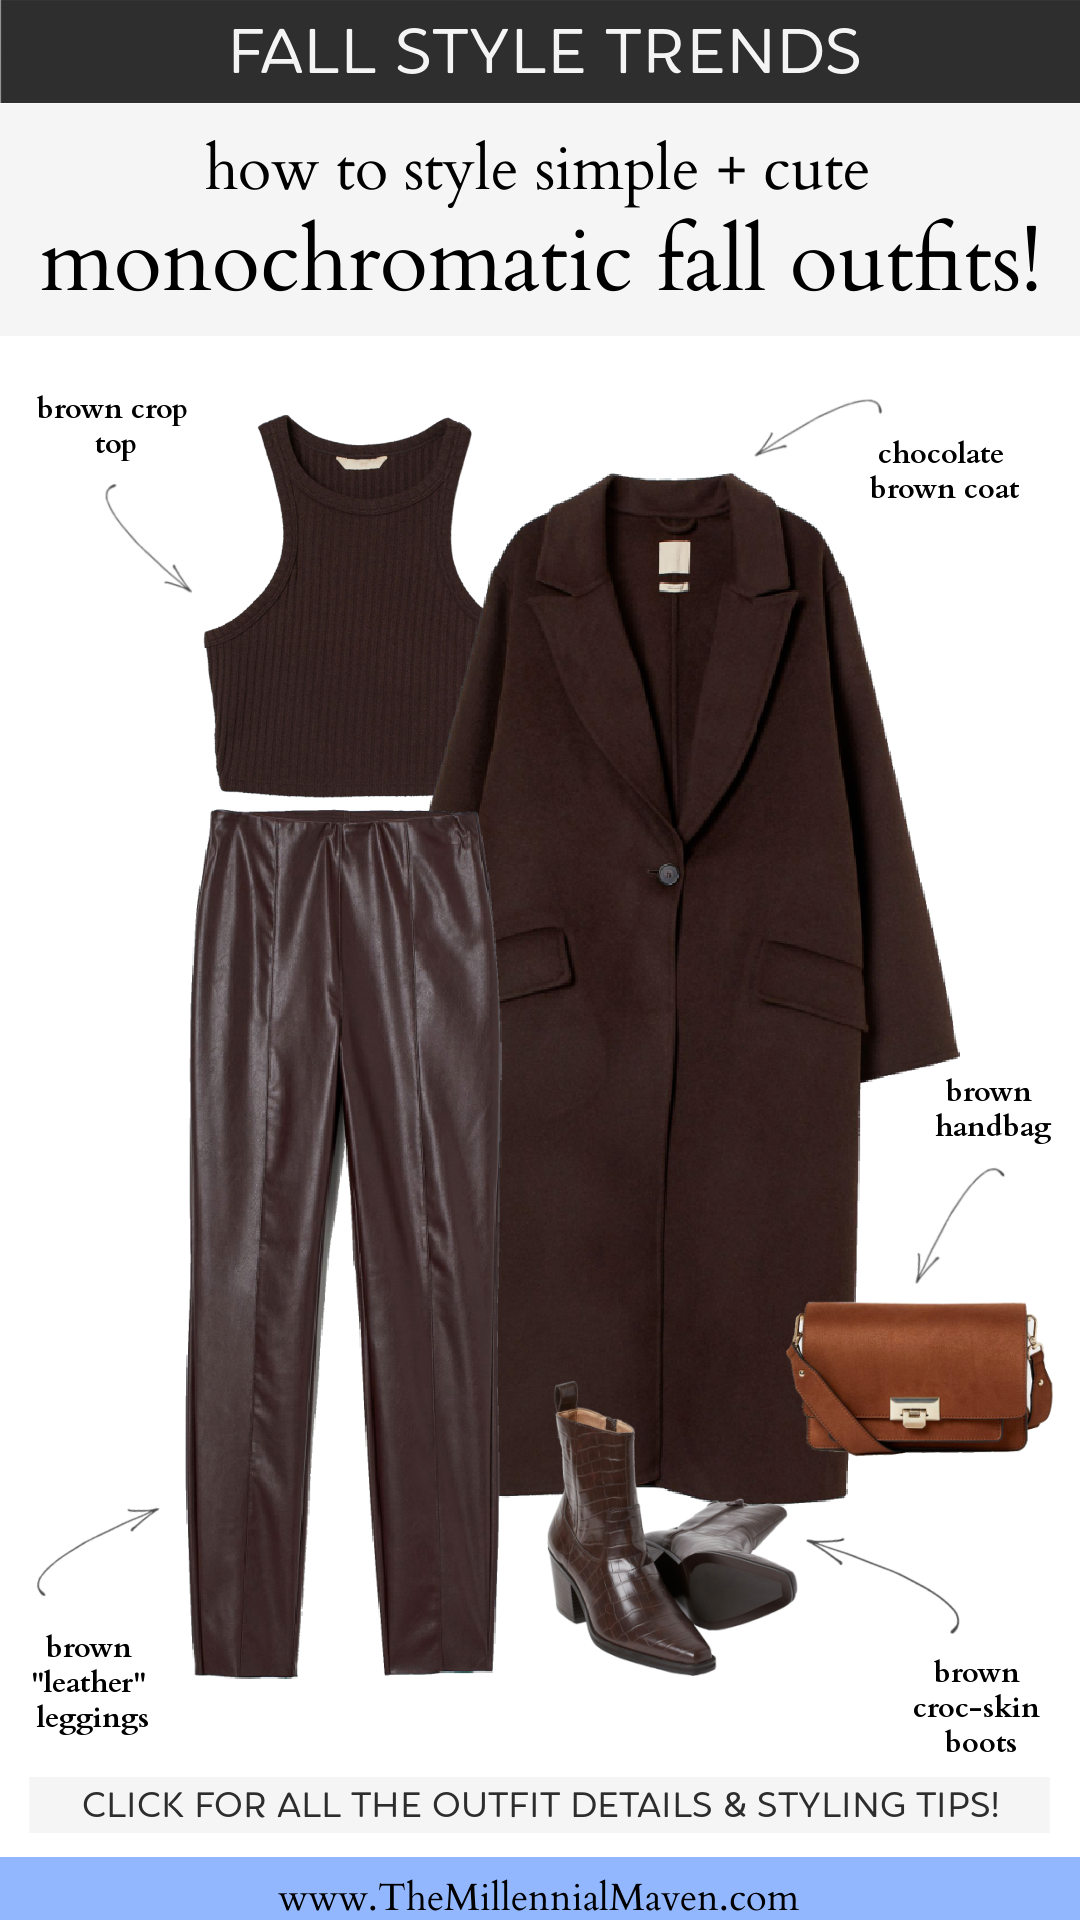 How to Style Wearable Monochromatic Outfits for Fall 2020!